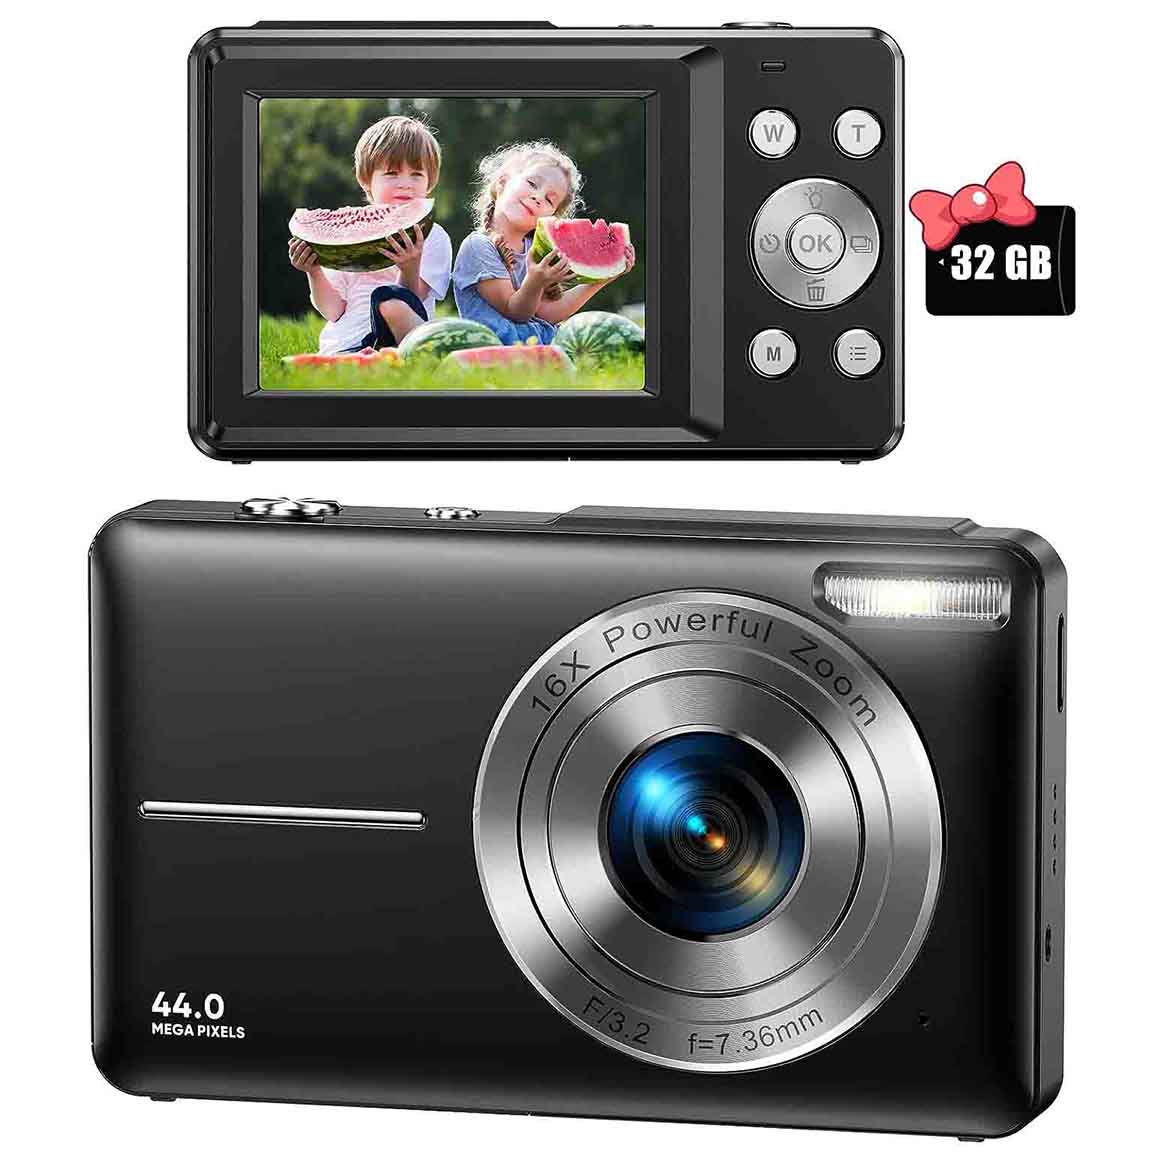 Back and front view of black camera with SD card